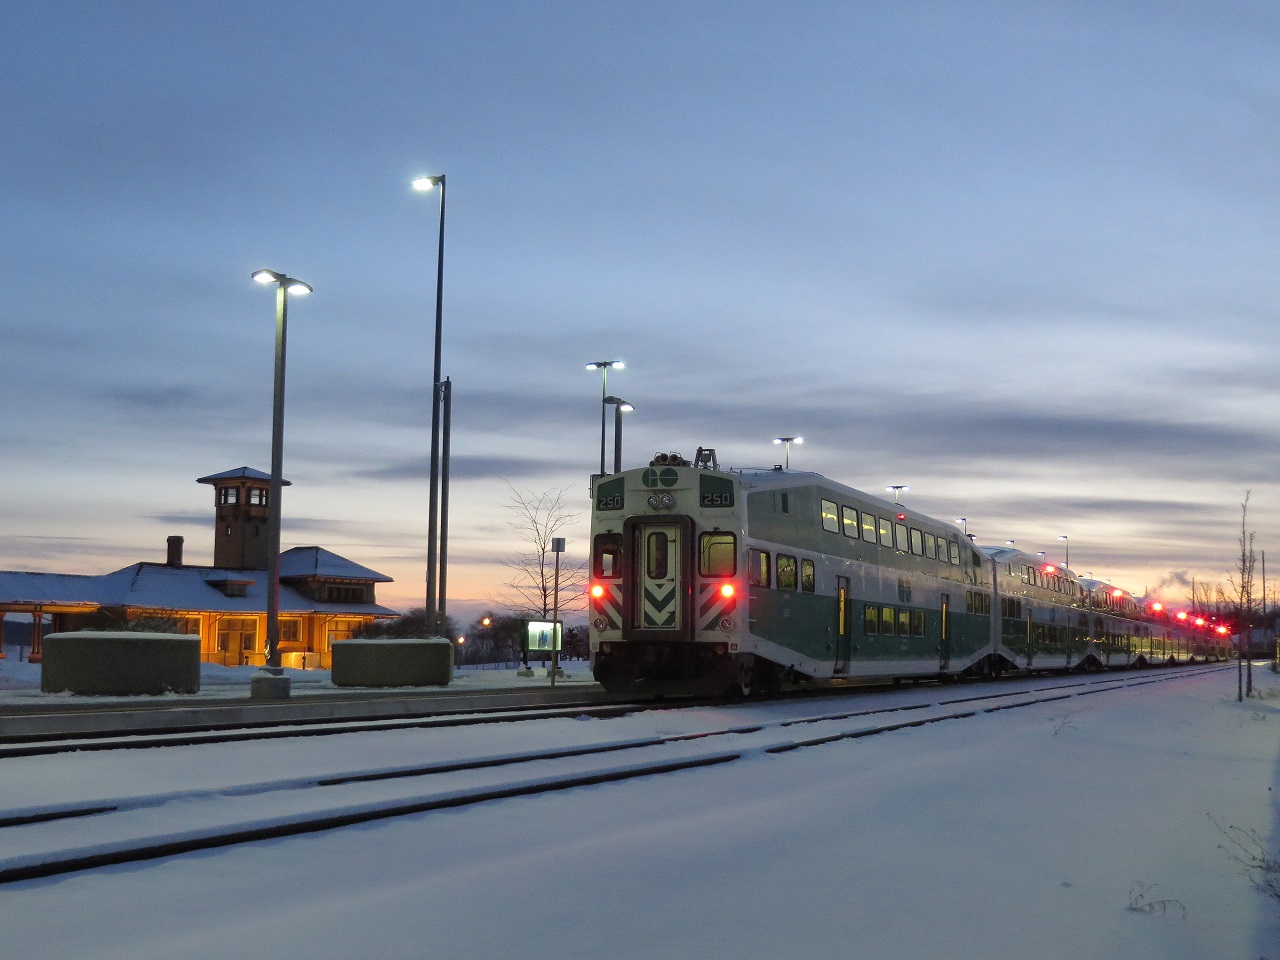 The last southbound train loads at the Allandale Waterfront station. The partially restored Grand Trunk Allandale station is in the distance. The days are getting shorter, last week this was a night shot.